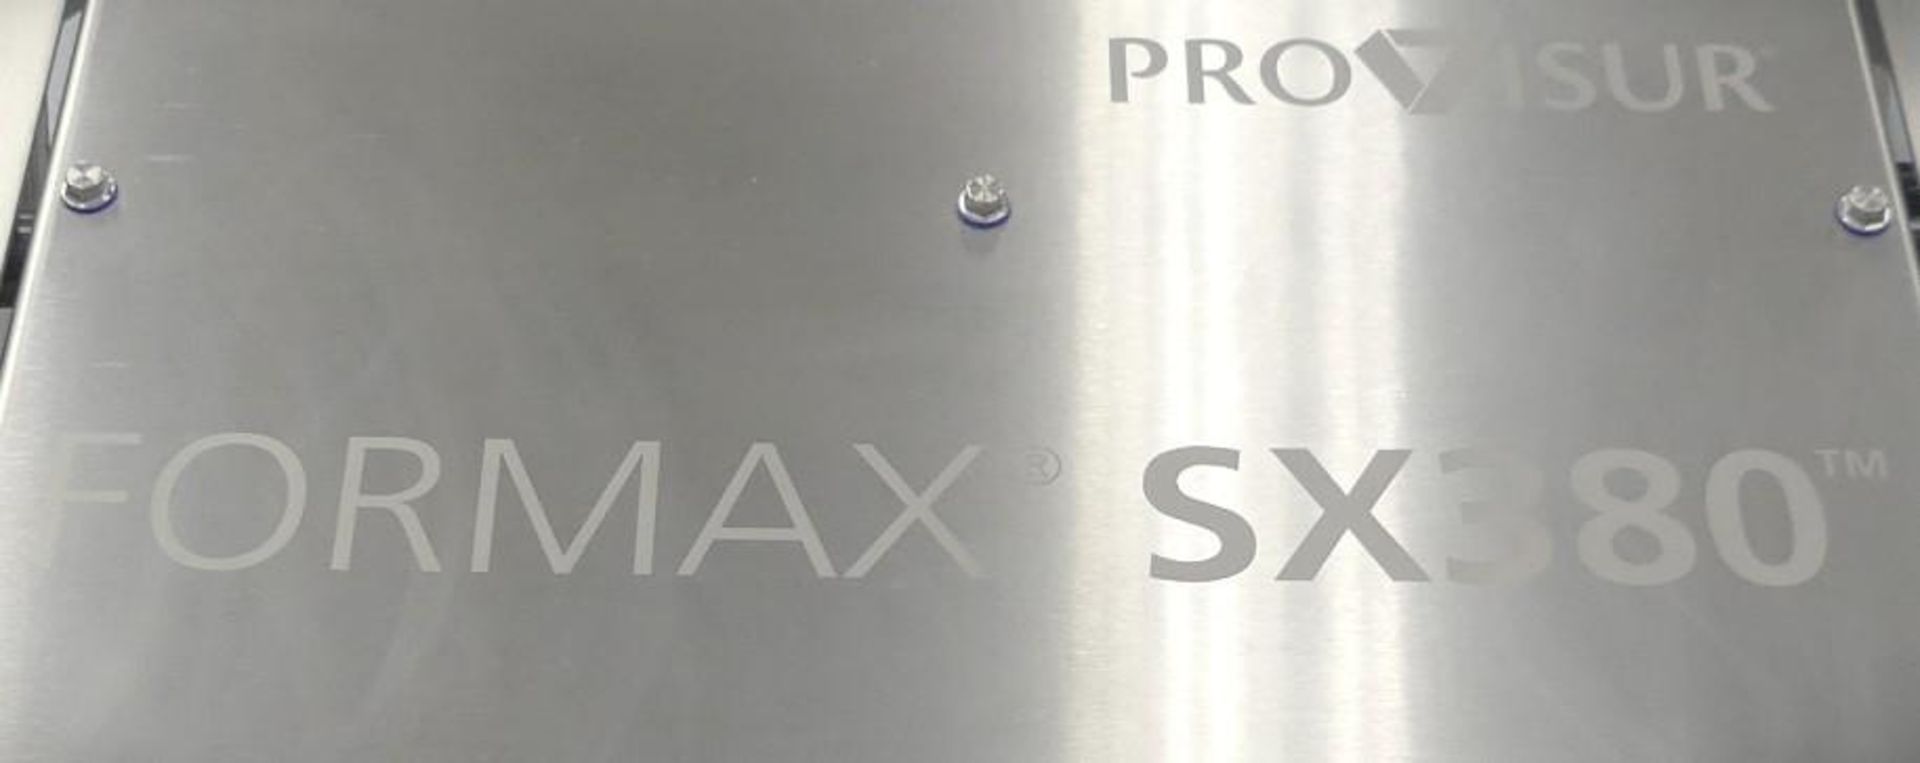 Formax SX380 Stainless Steel Slicing System - Image 52 of 70